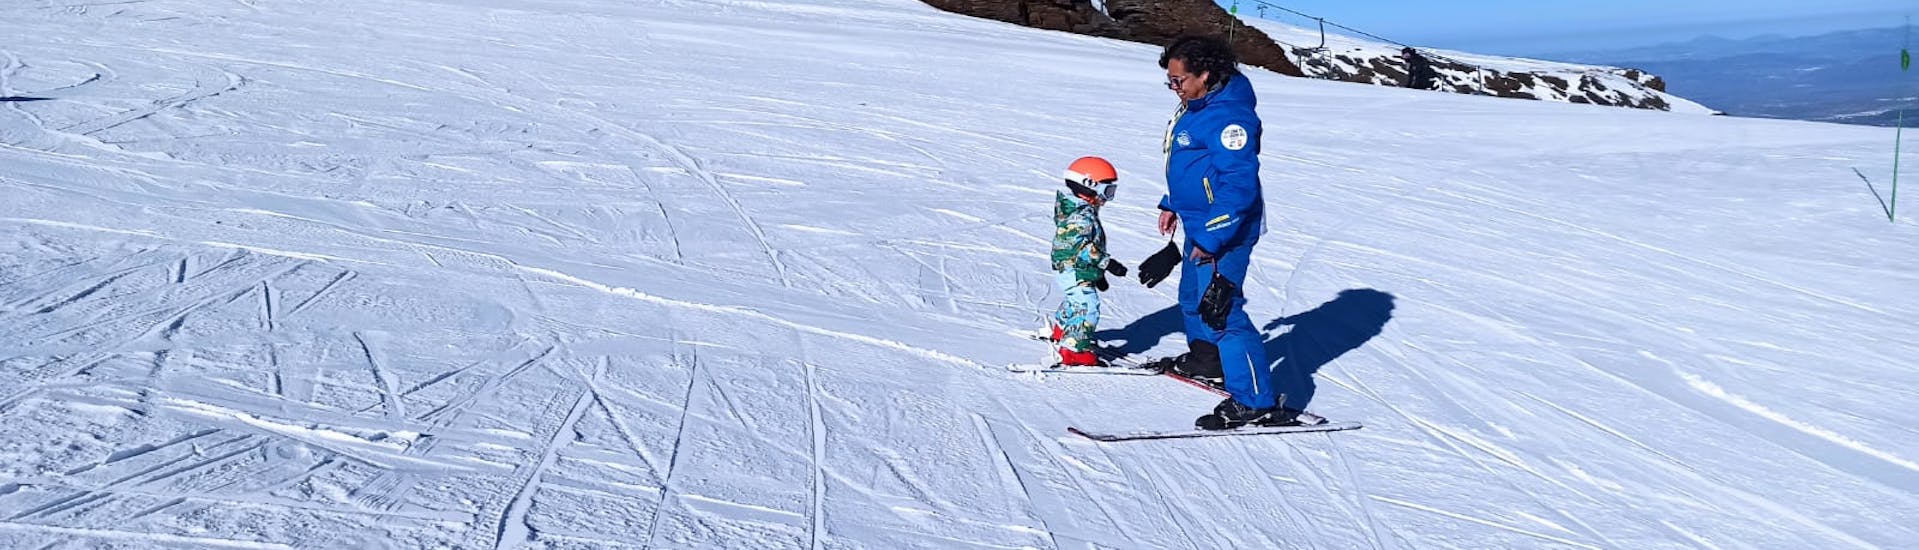 Private Ski Lessons for Kids (3-12 y.) of All Levels.